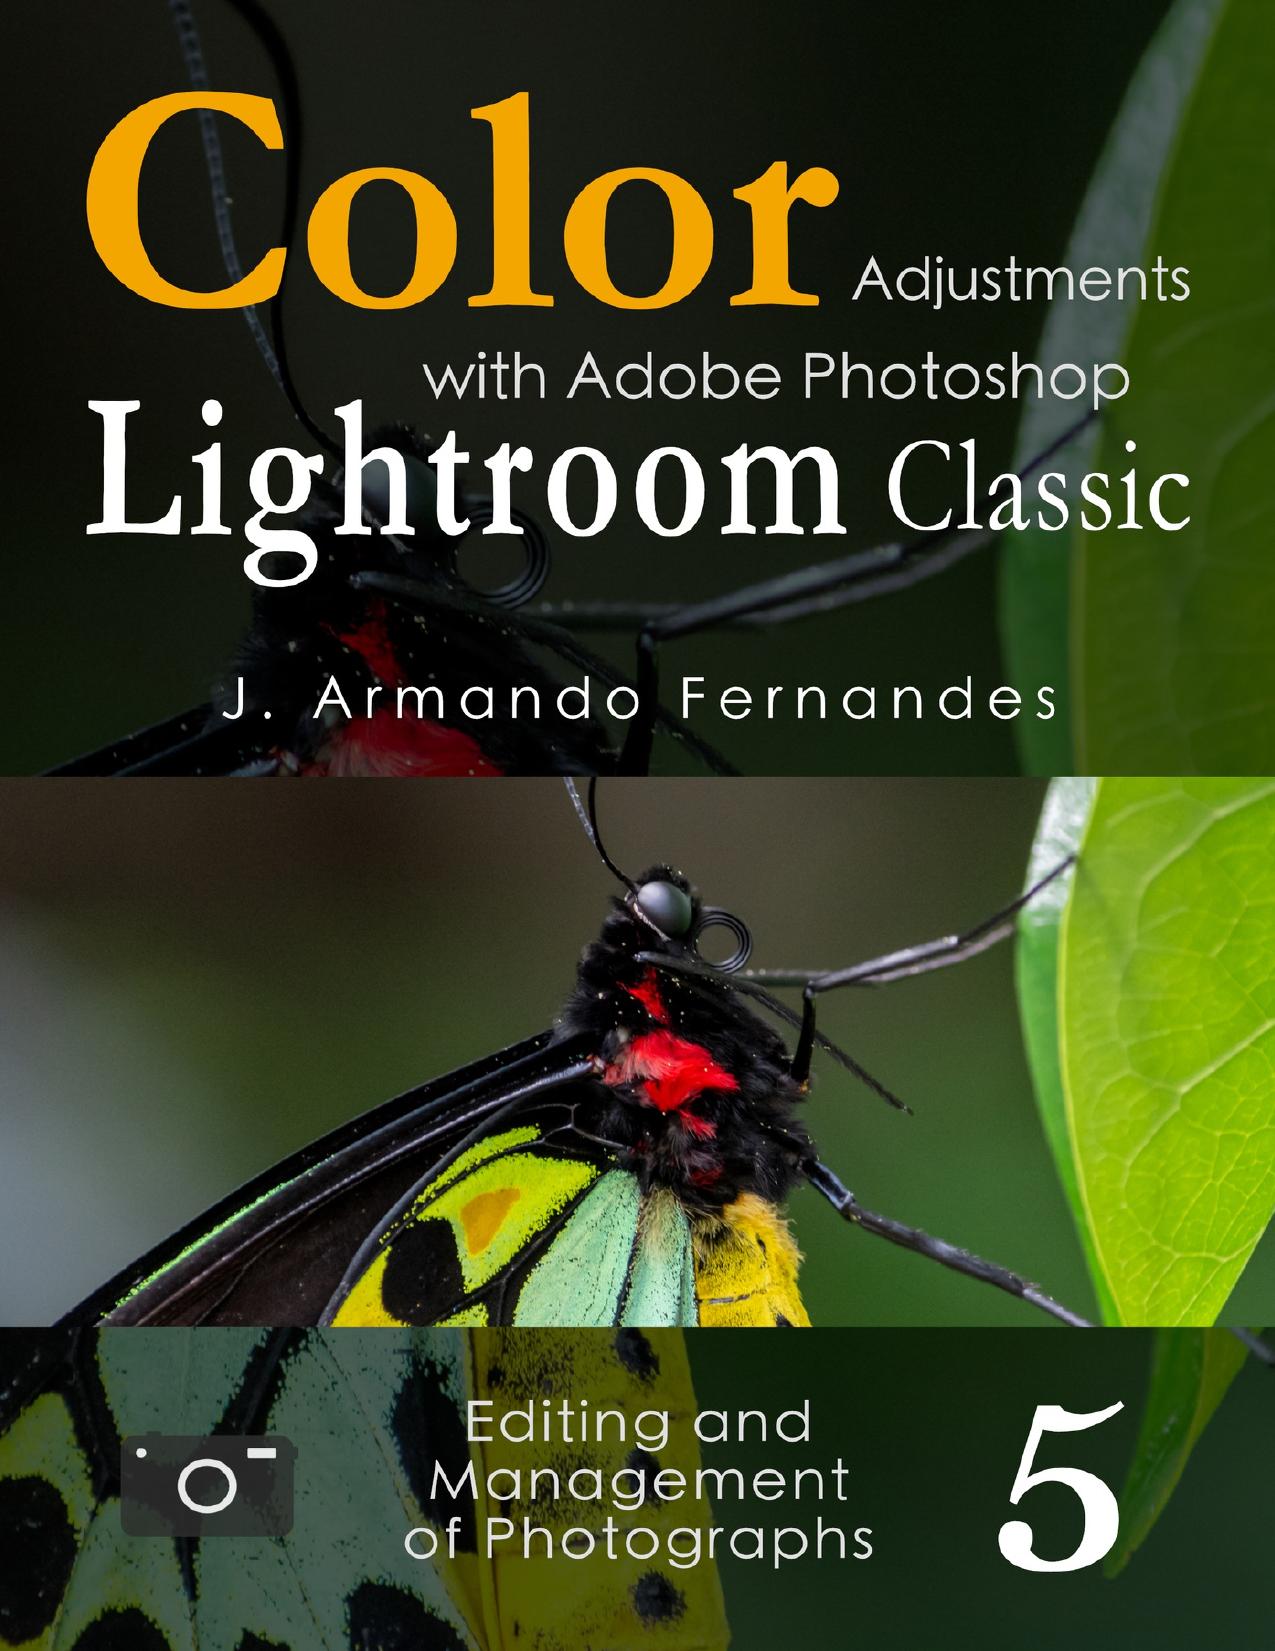 Color Adjustments in Photographs: with Adobe Photoshop Lightroom Classic software (Editing and Management of Photographs Book 5) by Fernandes J. Armando